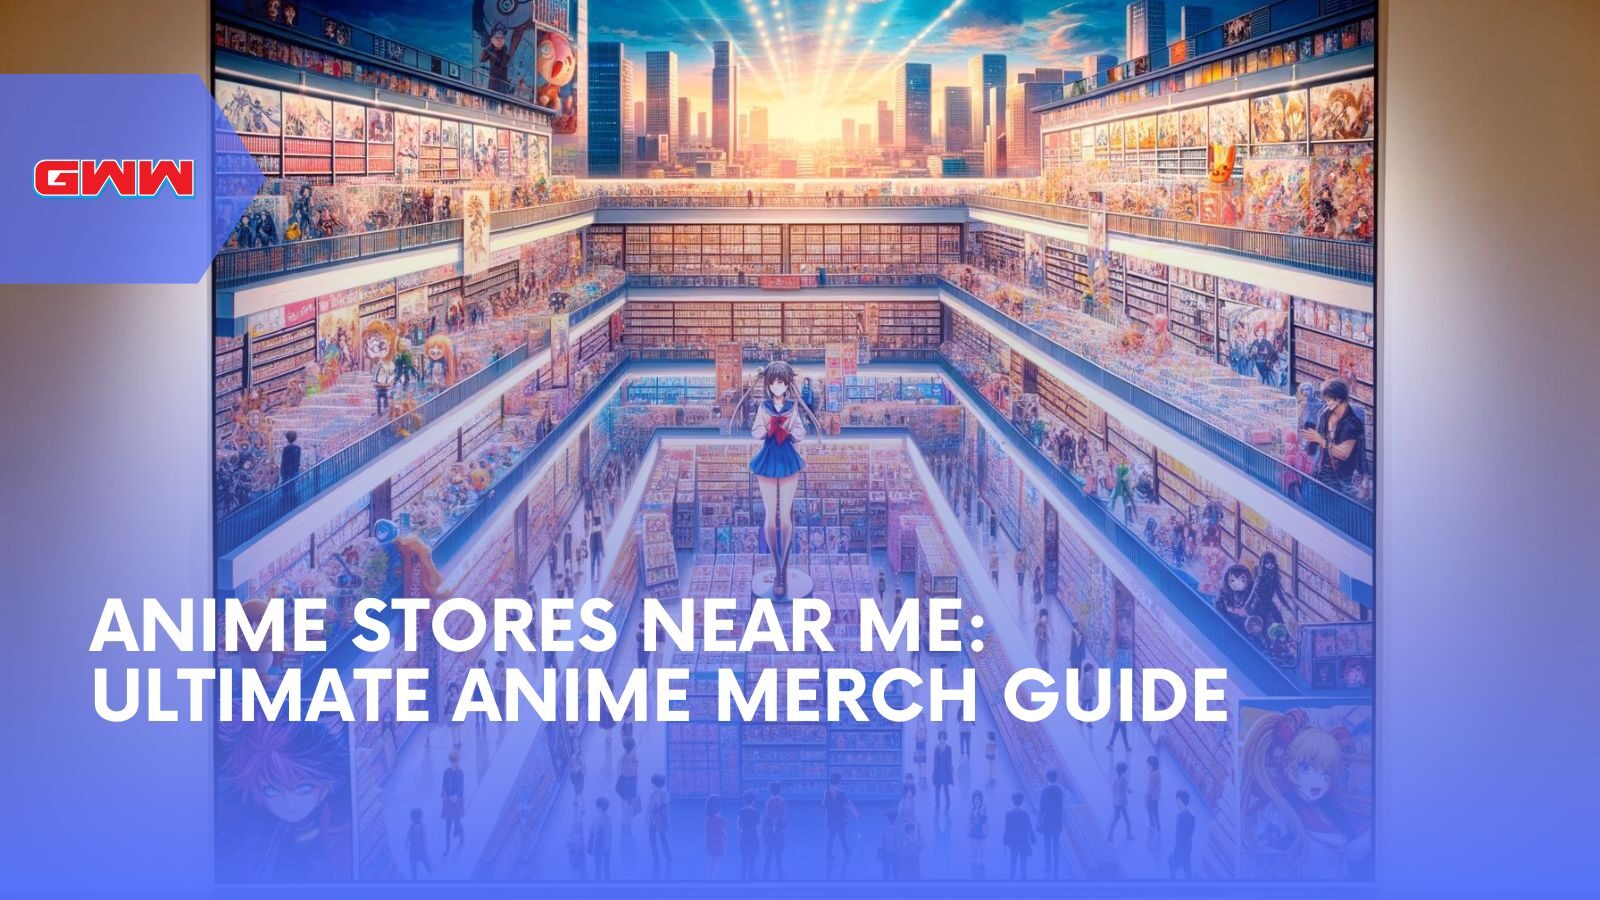 Anime Stores Near Me: Ultimate Anime Merch Guide